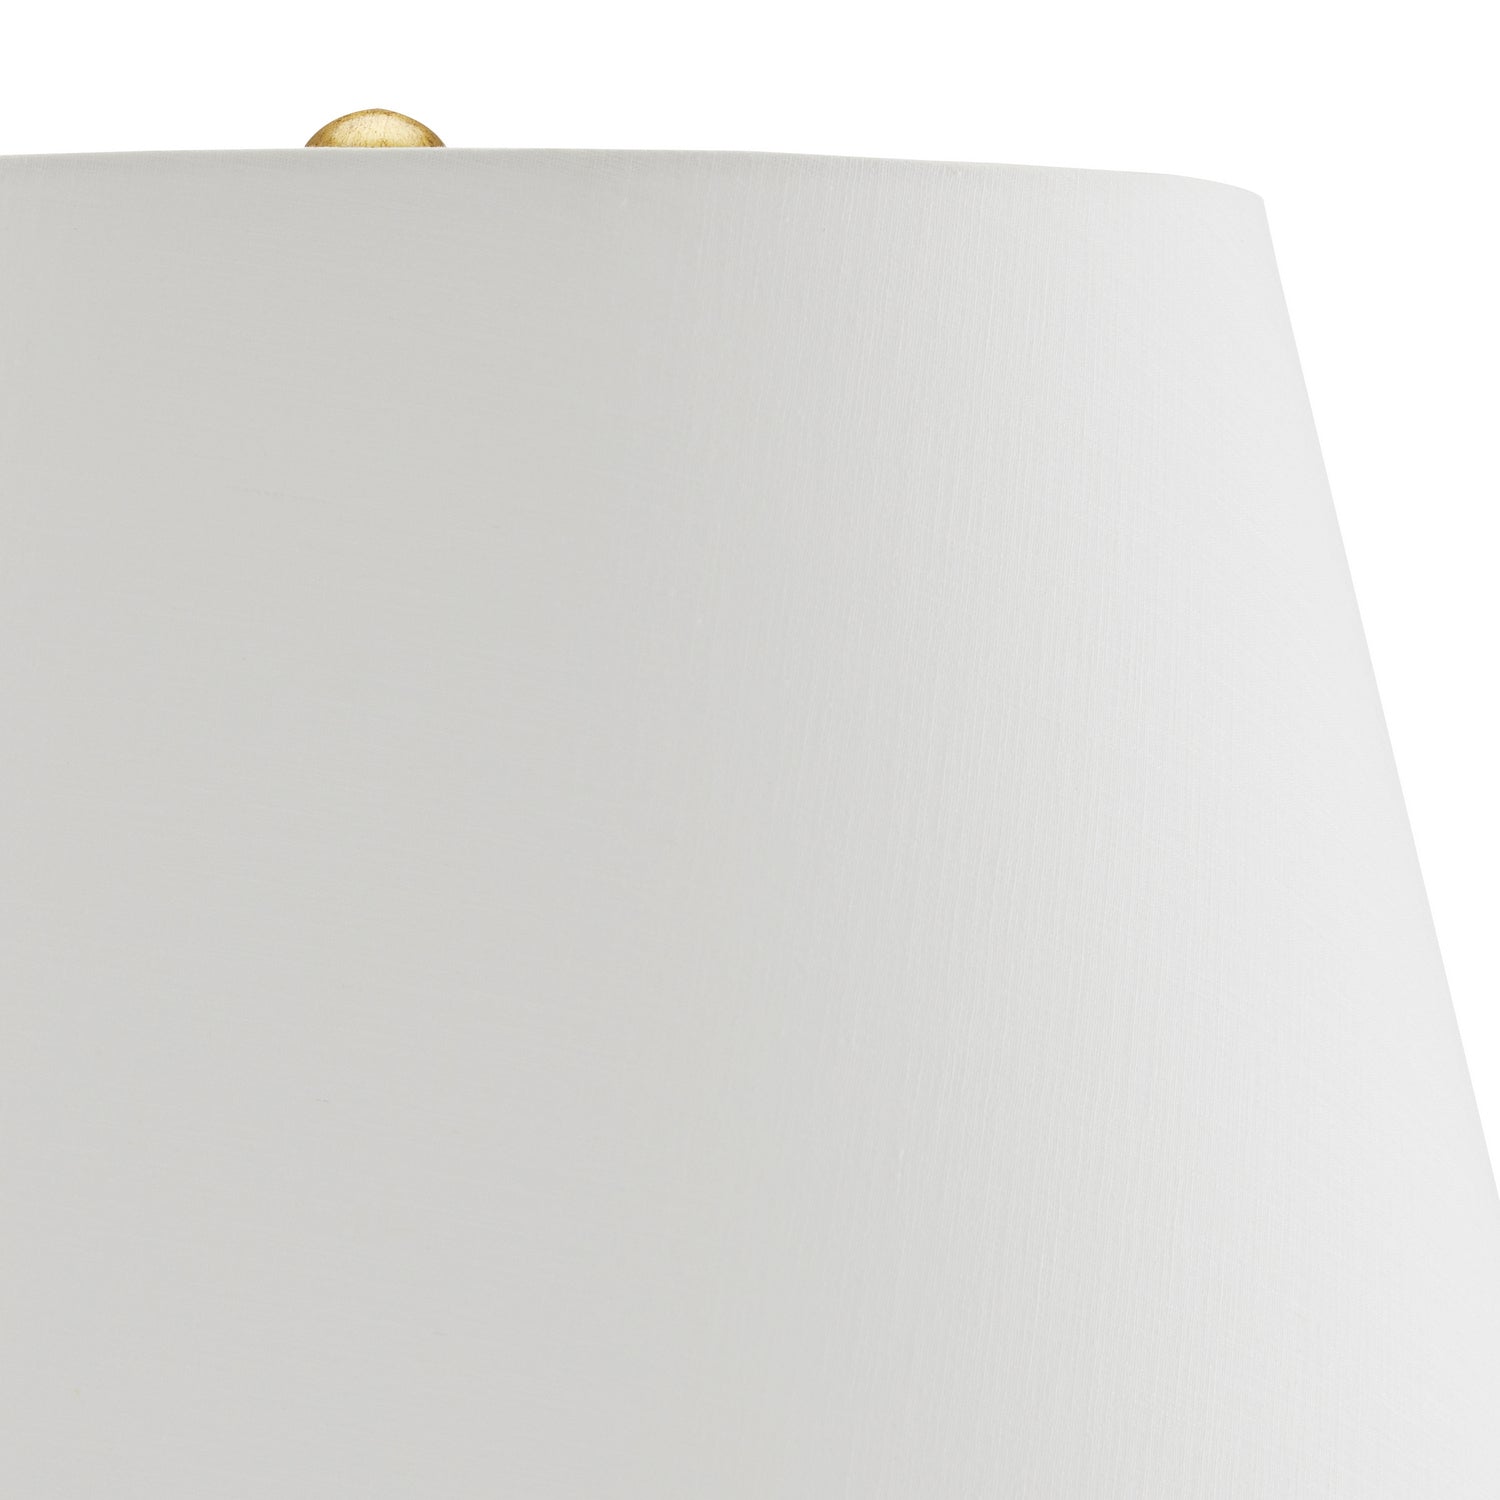 One Light Table Lamp from the Sakura collection in Blue/White/Gold Leaf finish